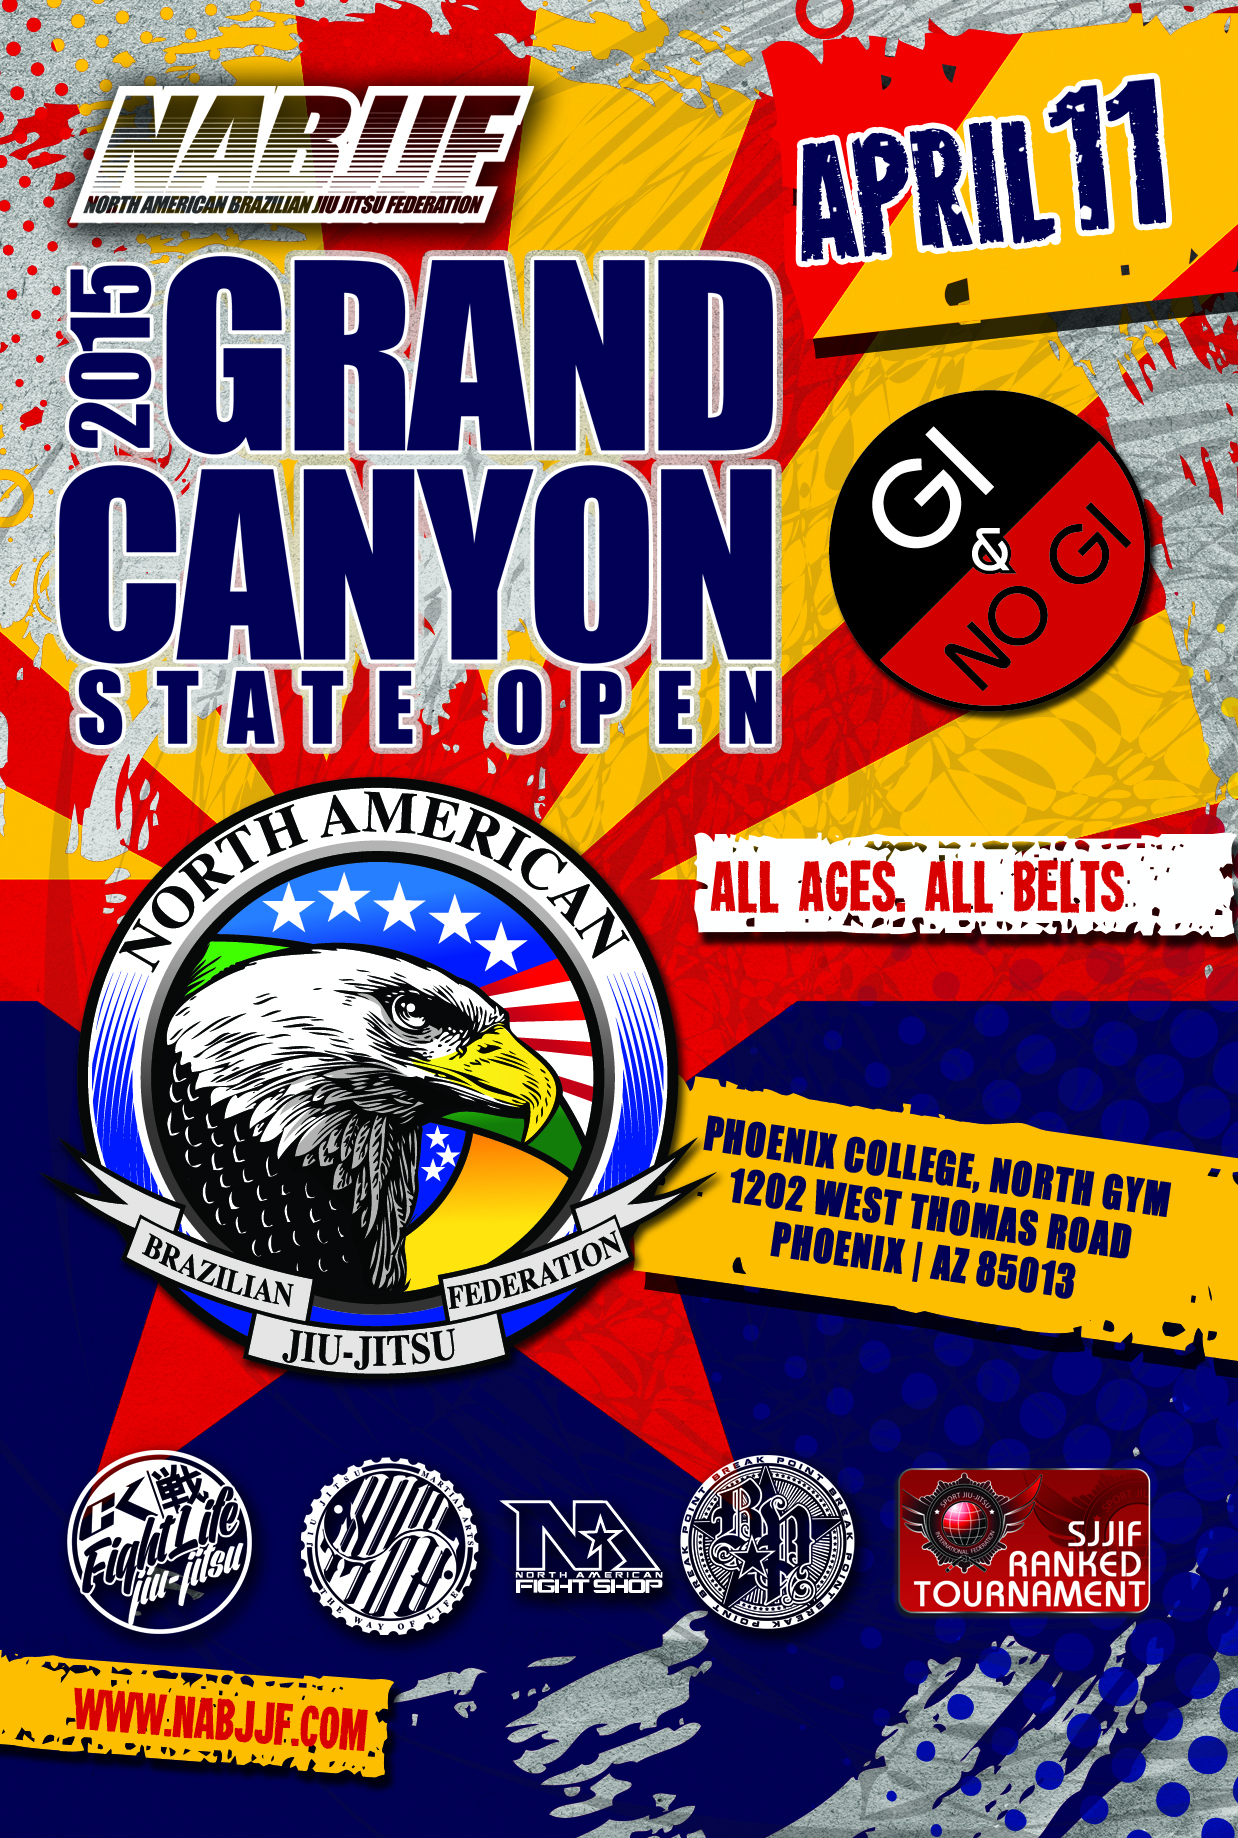 Grand Canyon State Open 4/11/15